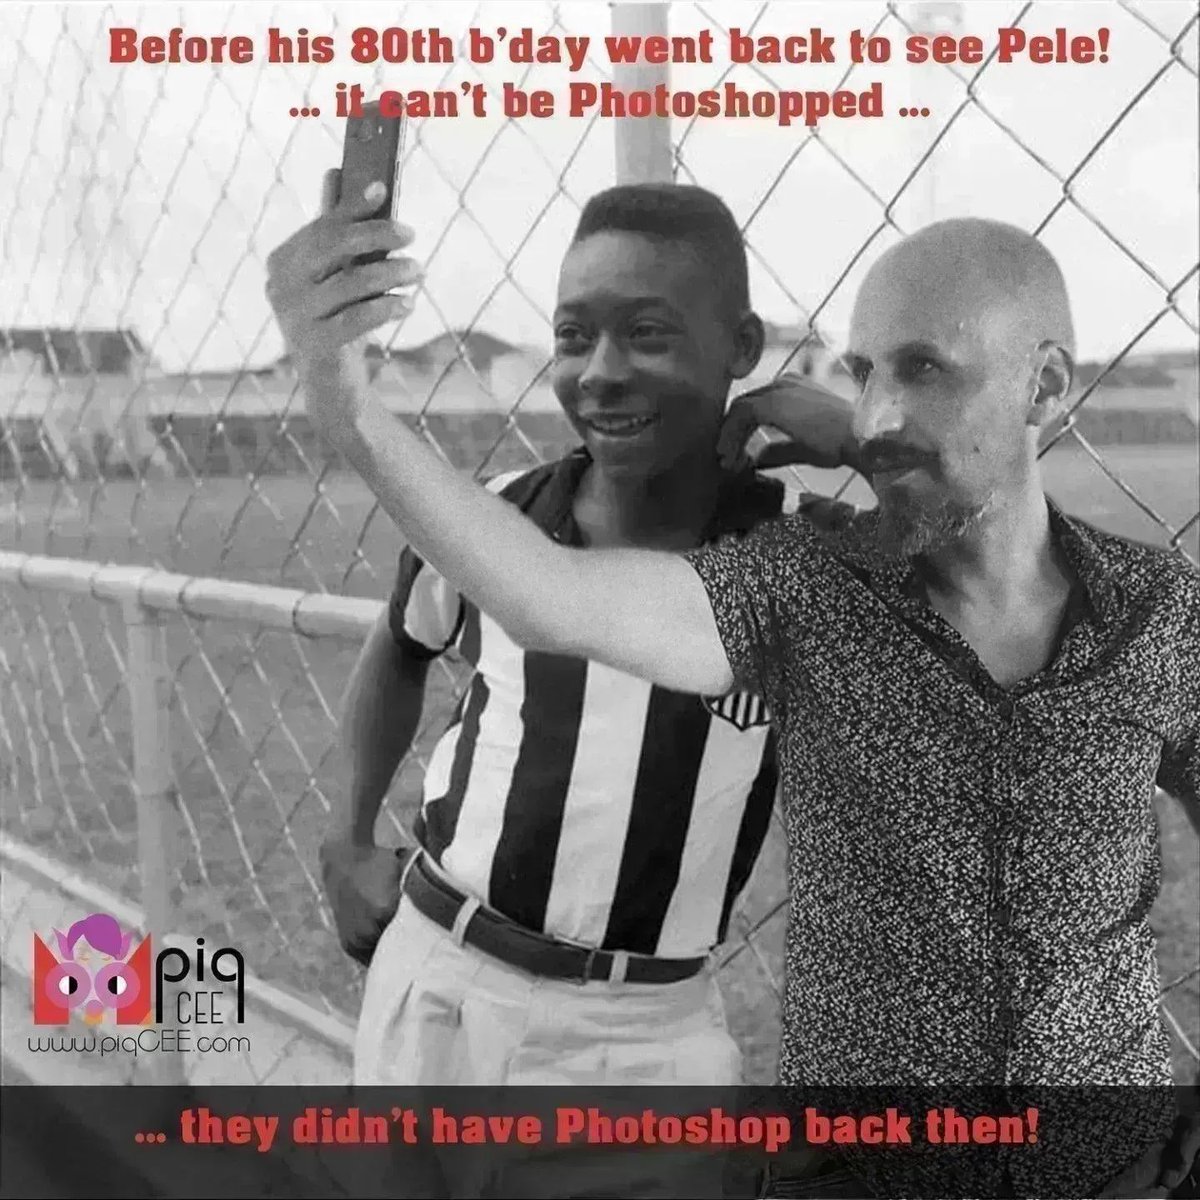 Popped back to take a quick selfie with the one & only Pele! It can't be Photoshopped...
@piqCEE
buff.ly/3jTJPSc 
#personalgift #uniquegifts #gifts #printed #personalisedgifts #personalisedgift #wallart #decor #holidaygifts #MHHSBD #UKGiftAM